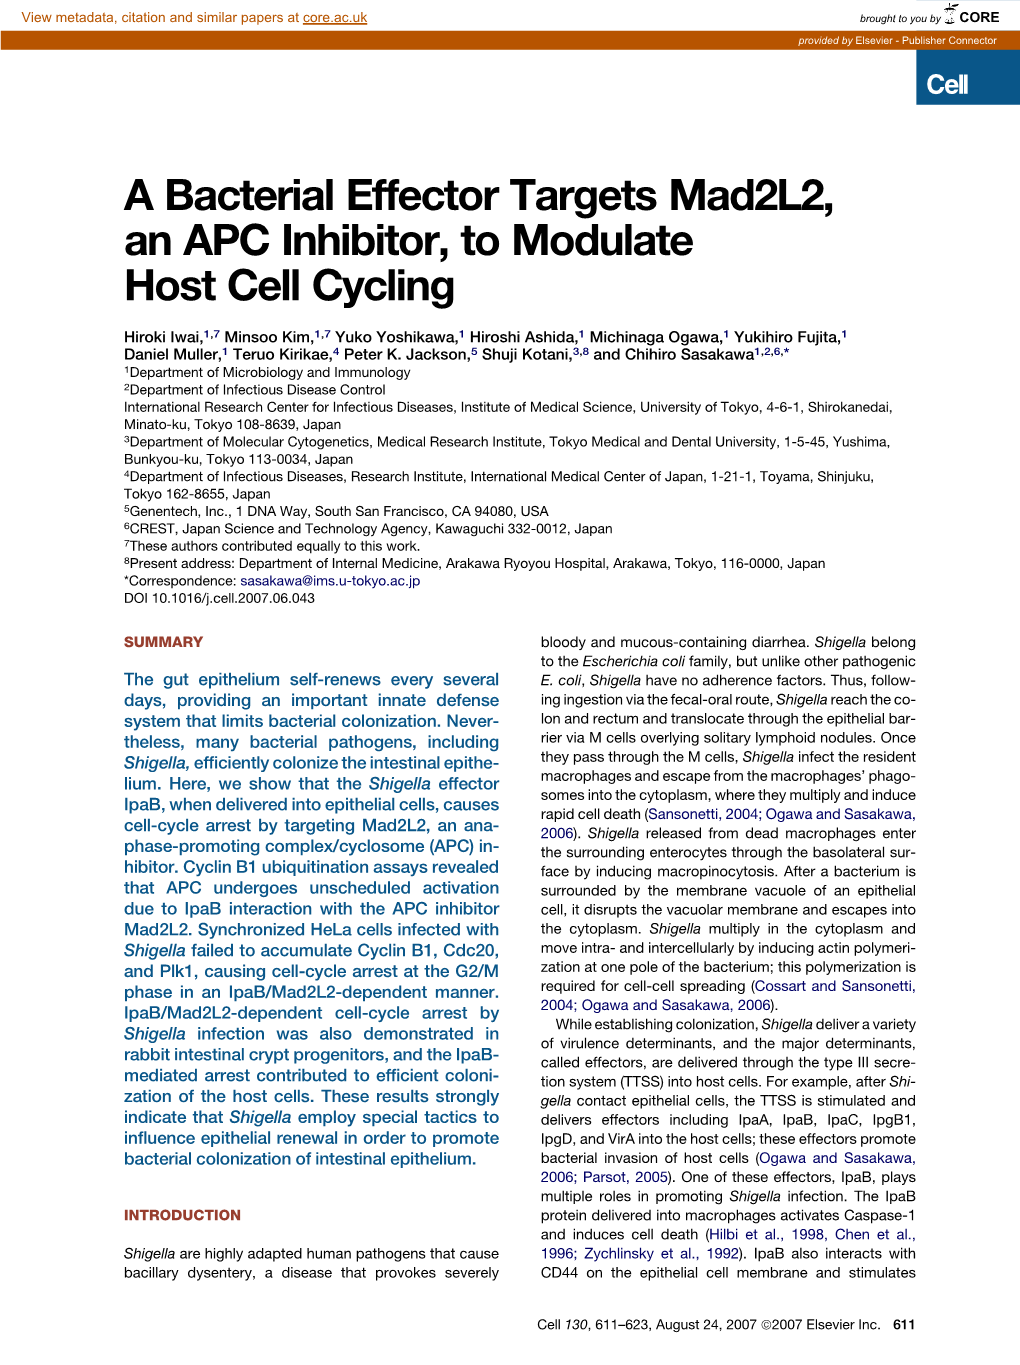 A Bacterial Effector Targets Mad2l2, an APC Inhibitor, to Modulate Host Cell Cycling